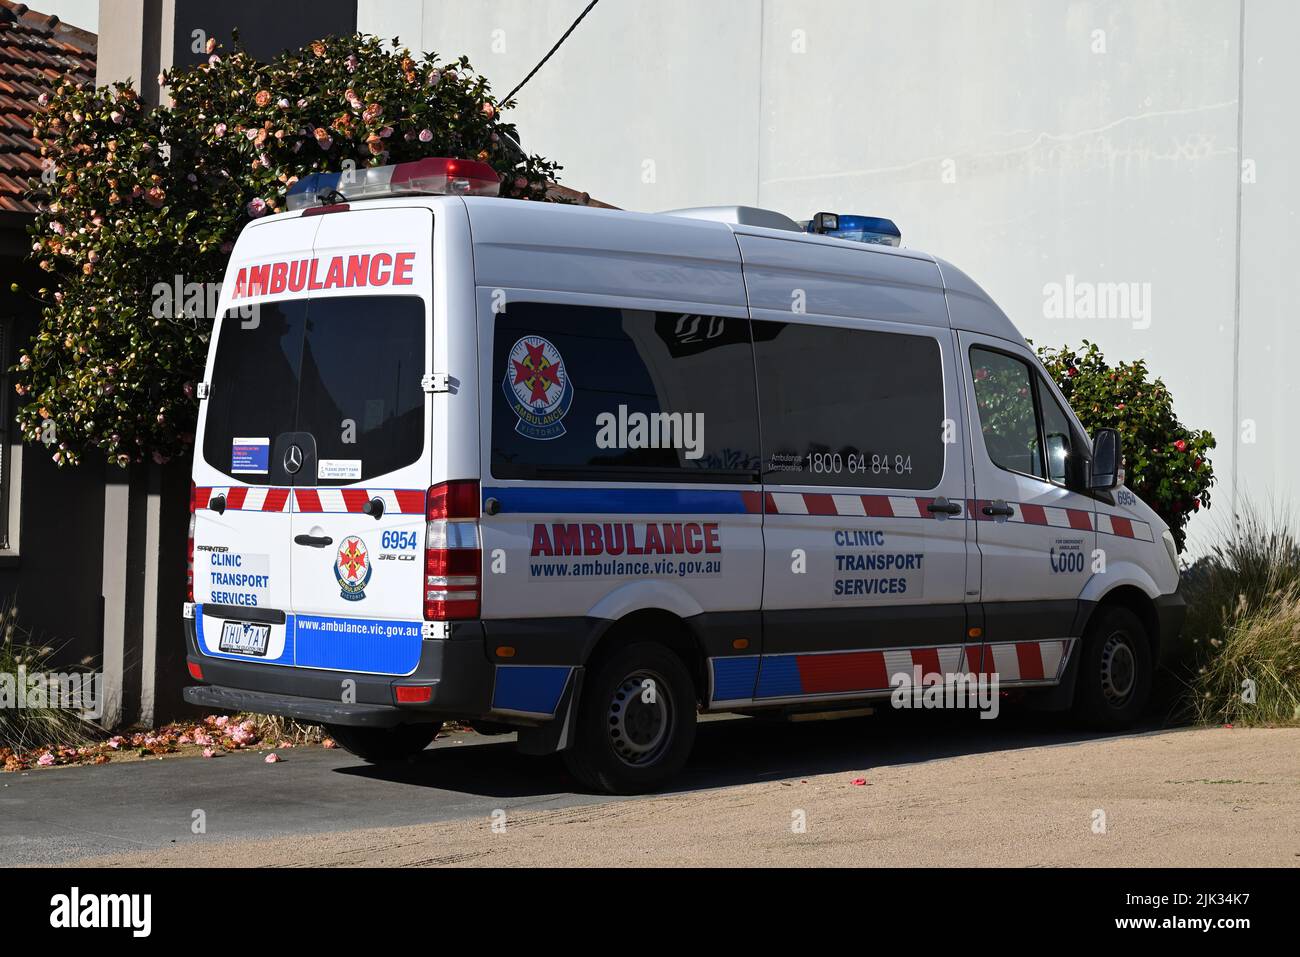 White Ambulance Victoria Clinic Transport Services vehicle, a Mercedes Benz Sprinter van, parked in a yard outside a building Stock Photo